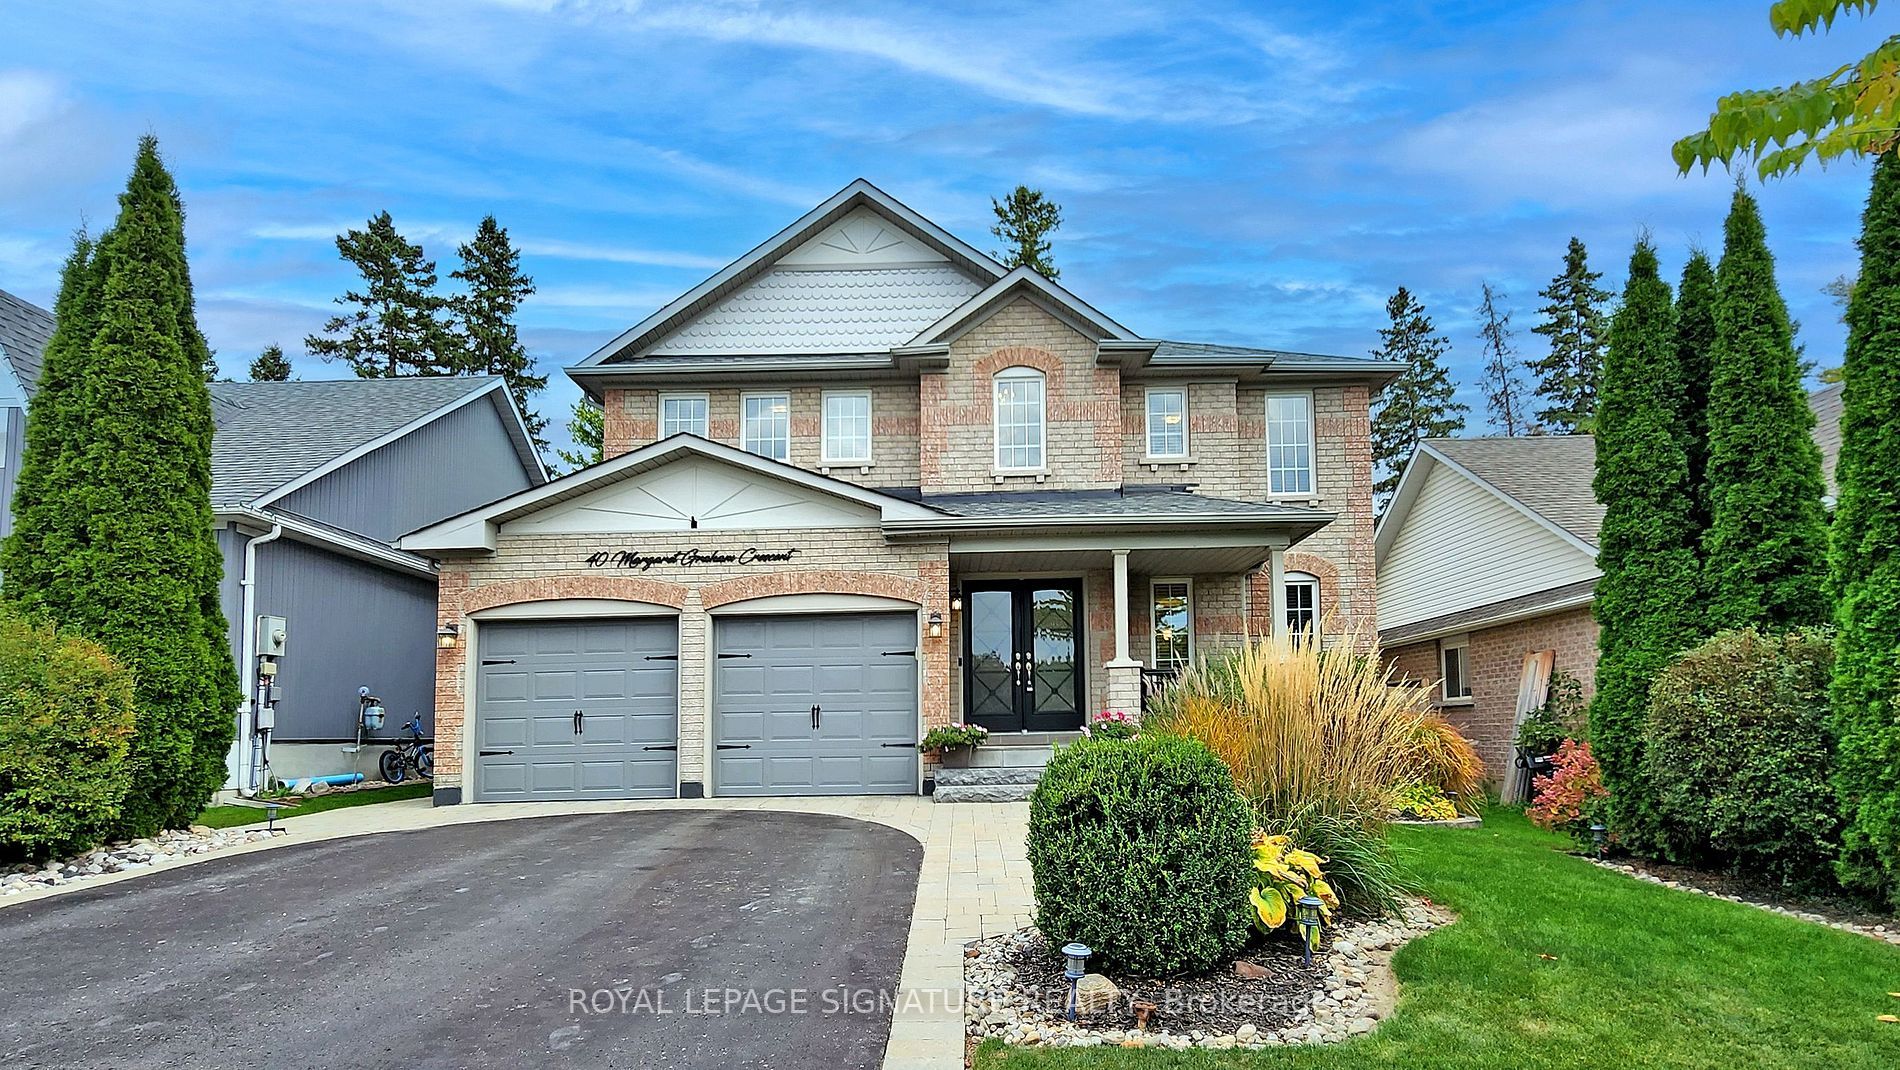 I have sold a property at 40 Margaret Graham CRES in East Gwillimbury
